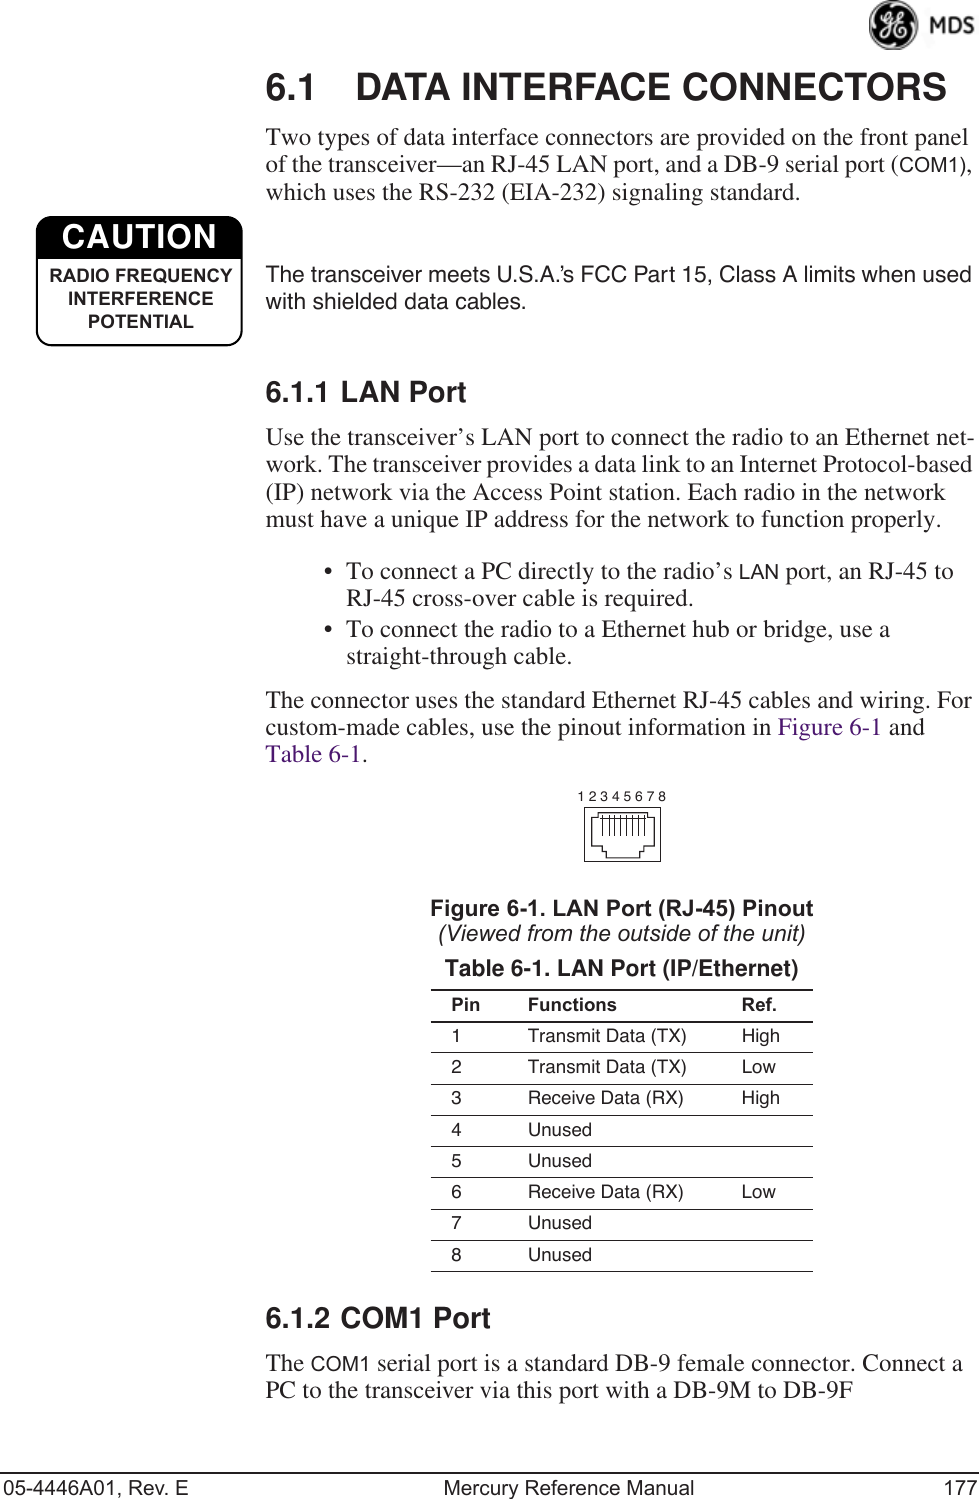 05-4446A01, Rev. E Mercury Reference Manual 1776.1 DATA INTERFACE CONNECTORSTwo types of data interface connectors are provided on the front panel of the transceiver—an RJ-45 LAN port, and a DB-9 serial port (COM1), which uses the RS-232 (EIA-232) signaling standard. The transceiver meets U.S.A.’s FCC Part 15, Class A limits when used with shielded data cables.6.1.1 LAN PortUse the transceiver’s LAN port to connect the radio to an Ethernet net-work. The transceiver provides a data link to an Internet Protocol-based (IP) network via the Access Point station. Each radio in the network must have a unique IP address for the network to function properly.• To connect a PC directly to the radio’s LAN port, an RJ-45 to RJ-45 cross-over cable is required. • To connect the radio to a Ethernet hub or bridge, use a straight-through cable.The connector uses the standard Ethernet RJ-45 cables and wiring. For custom-made cables, use the pinout information in Figure 6-1 and Table 6-1.Figure 6-1. LAN Port (RJ-45) Pinout(Viewed from the outside of the unit) 6.1.2 COM1 PortThe COM1 serial port is a standard DB-9 female connector. Connect a PC to the transceiver via this port with a DB-9M to DB-9F Table 6-1. LAN Port (IP/Ethernet)Pin Functions Ref.1 Transmit Data (TX) High2 Transmit Data (TX) Low3 Receive Data (RX) High4 Unused5 Unused6 Receive Data (RX) Low7 Unused8 UnusedCAUTIONRADIO FREQUENCYINTERFERENCE POTENTIAL1 2 3 4 5 6 7 8